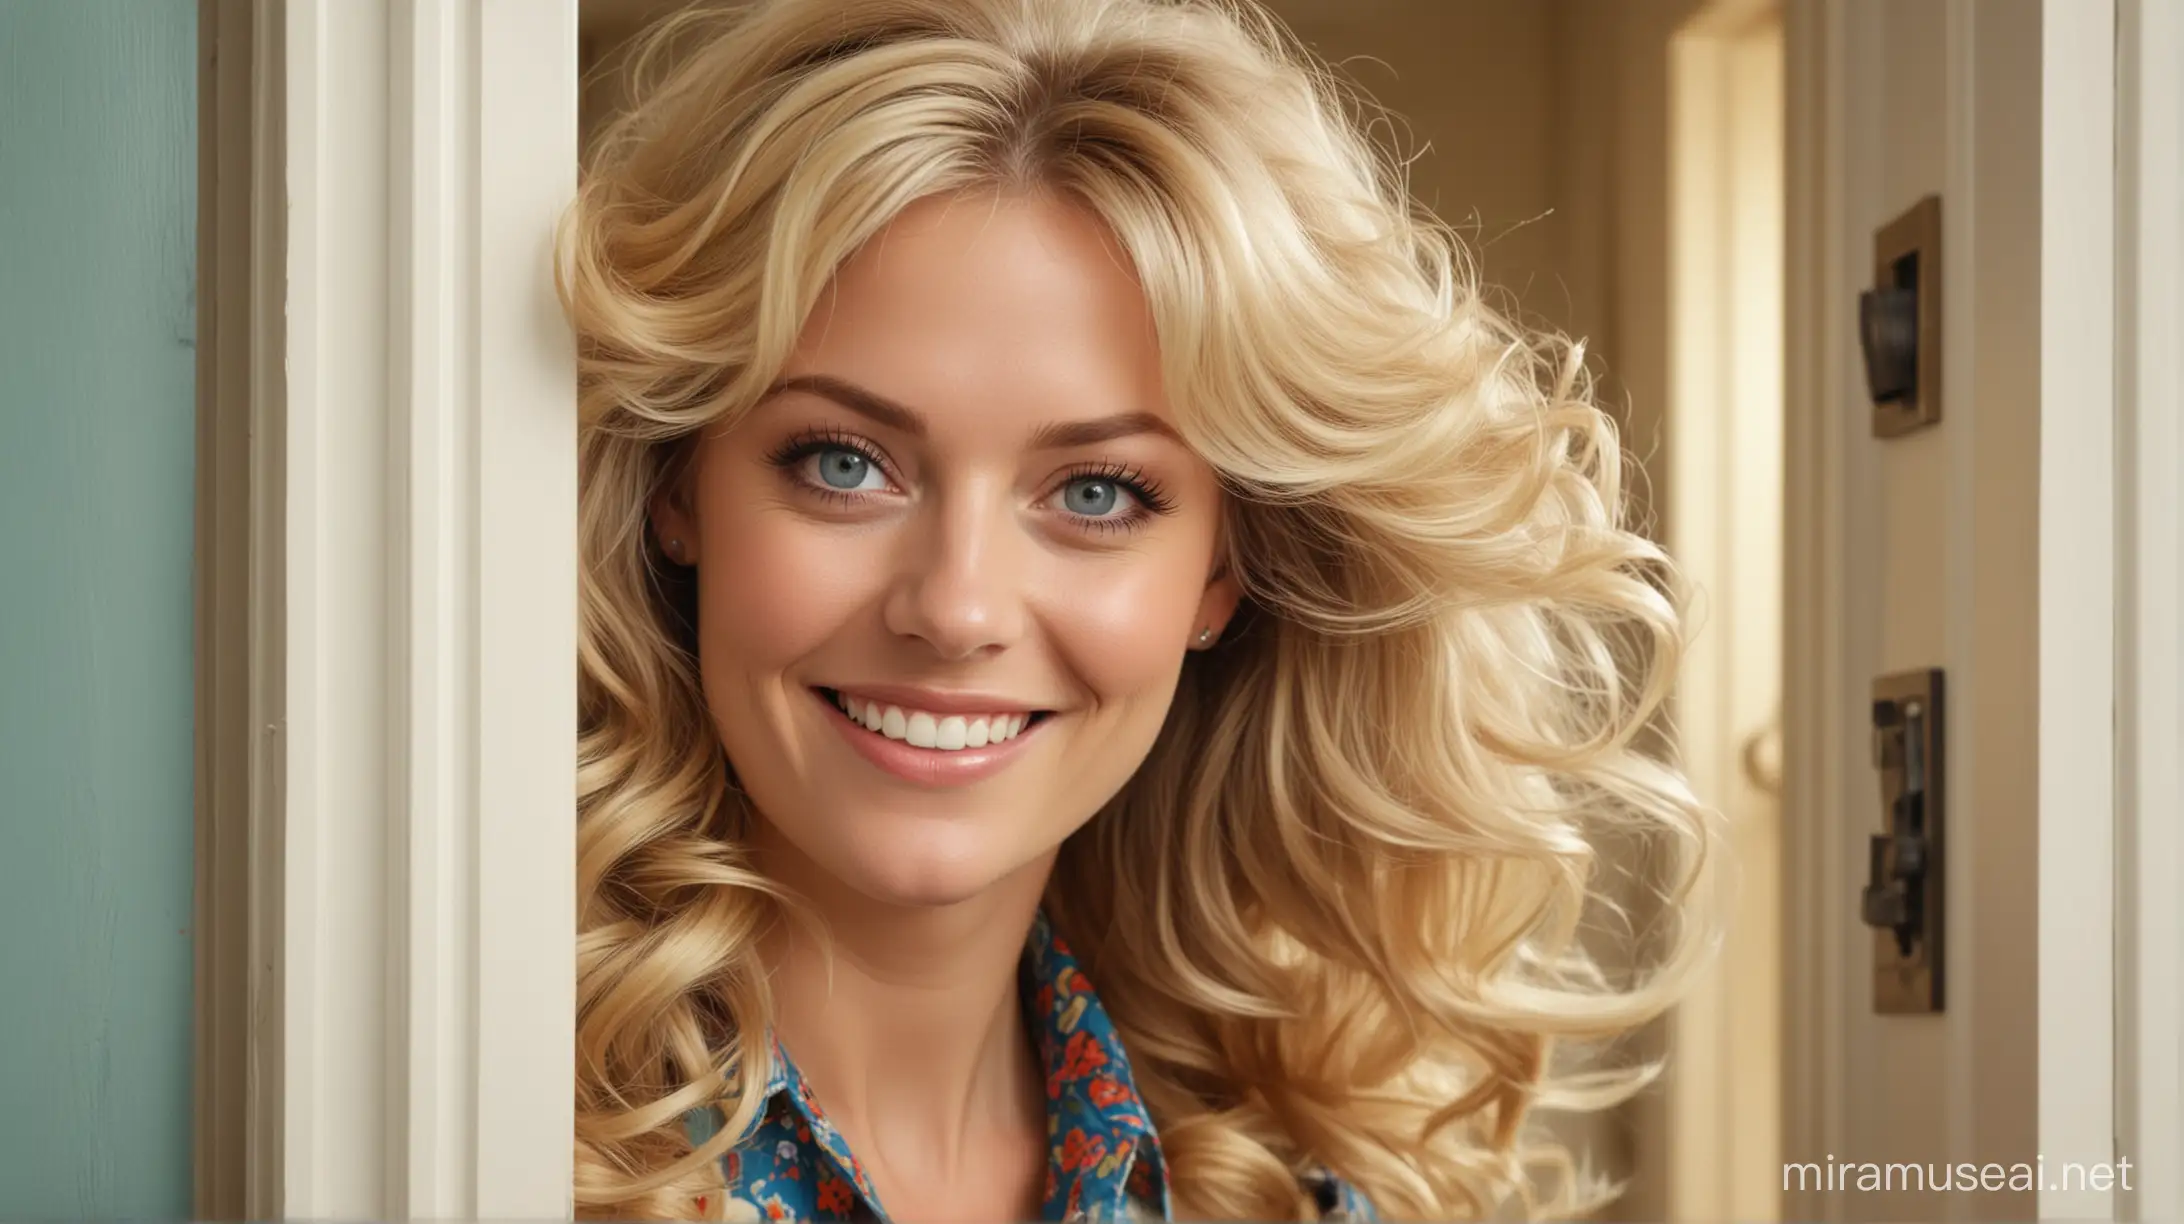 a blonde woman from stylized in 1970s  with blue eyes peeking through a slightly ajar door. She has a very cheerful and welcoming expression on her face, with a bright, wide smile. Her hair is styled in voluminous waves, and she has makeup on, including mascara and possibly eyeliner, which accentuates her eyes. The lighting of the image suggests an indoor setting with a warm ambiance, and the woman is wearing a garment with a floral pattern, suggesting a casual, perhaps spring or summer attire. The illustration style is detailed and somewhat stylized, with a focus on the woman's face.the background is 1970s american home innside.